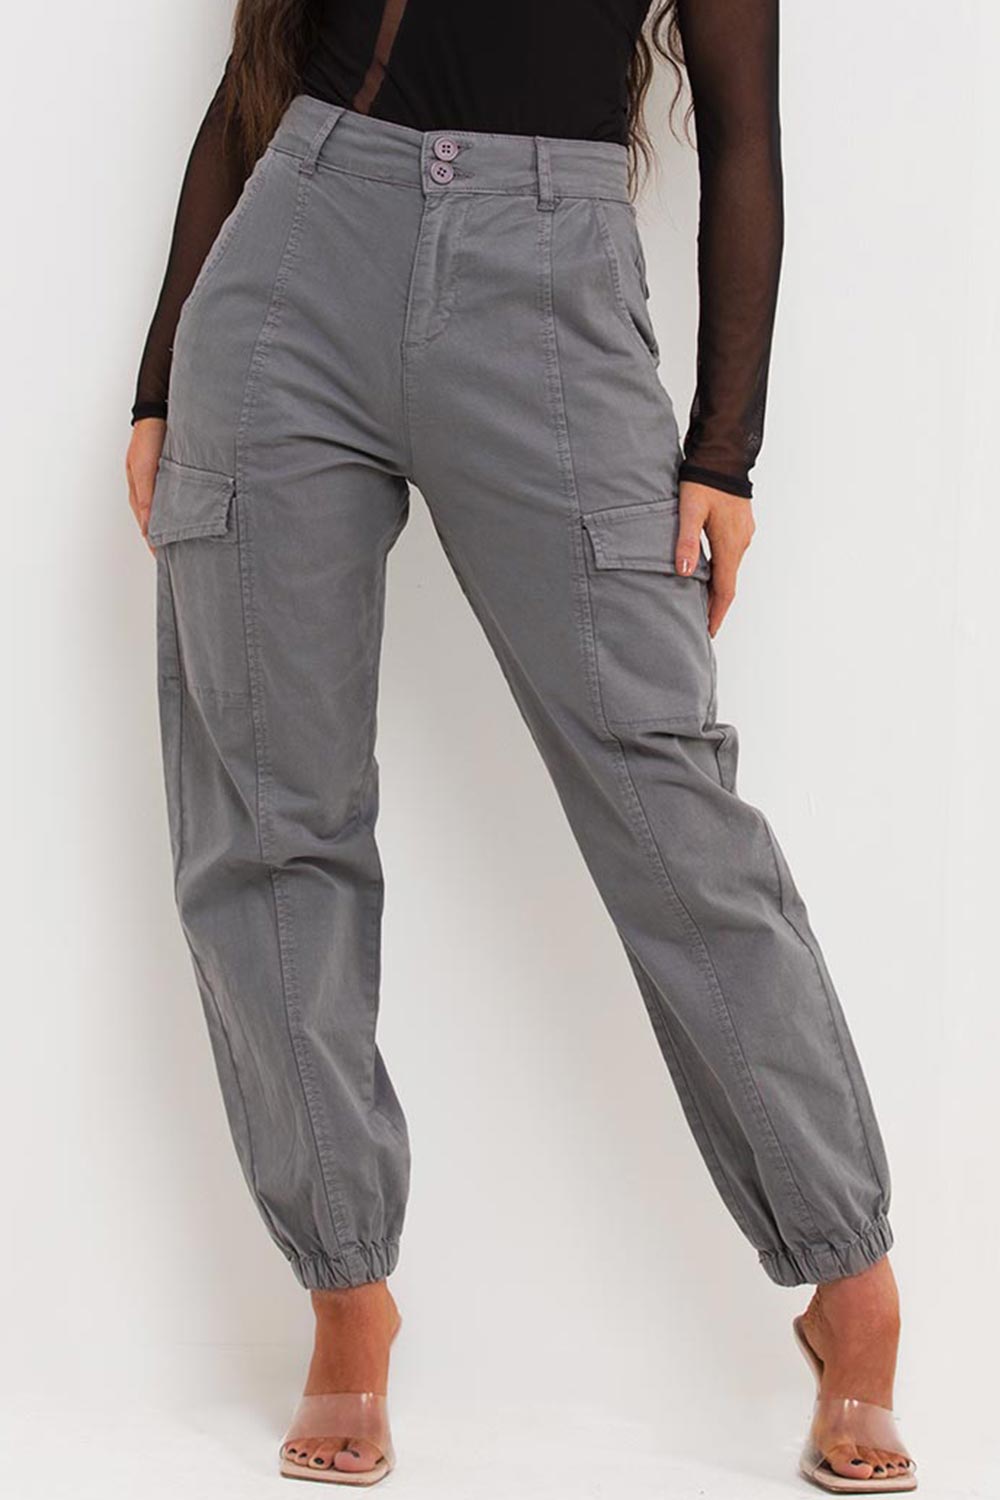 grey trousers with cuff bottoms